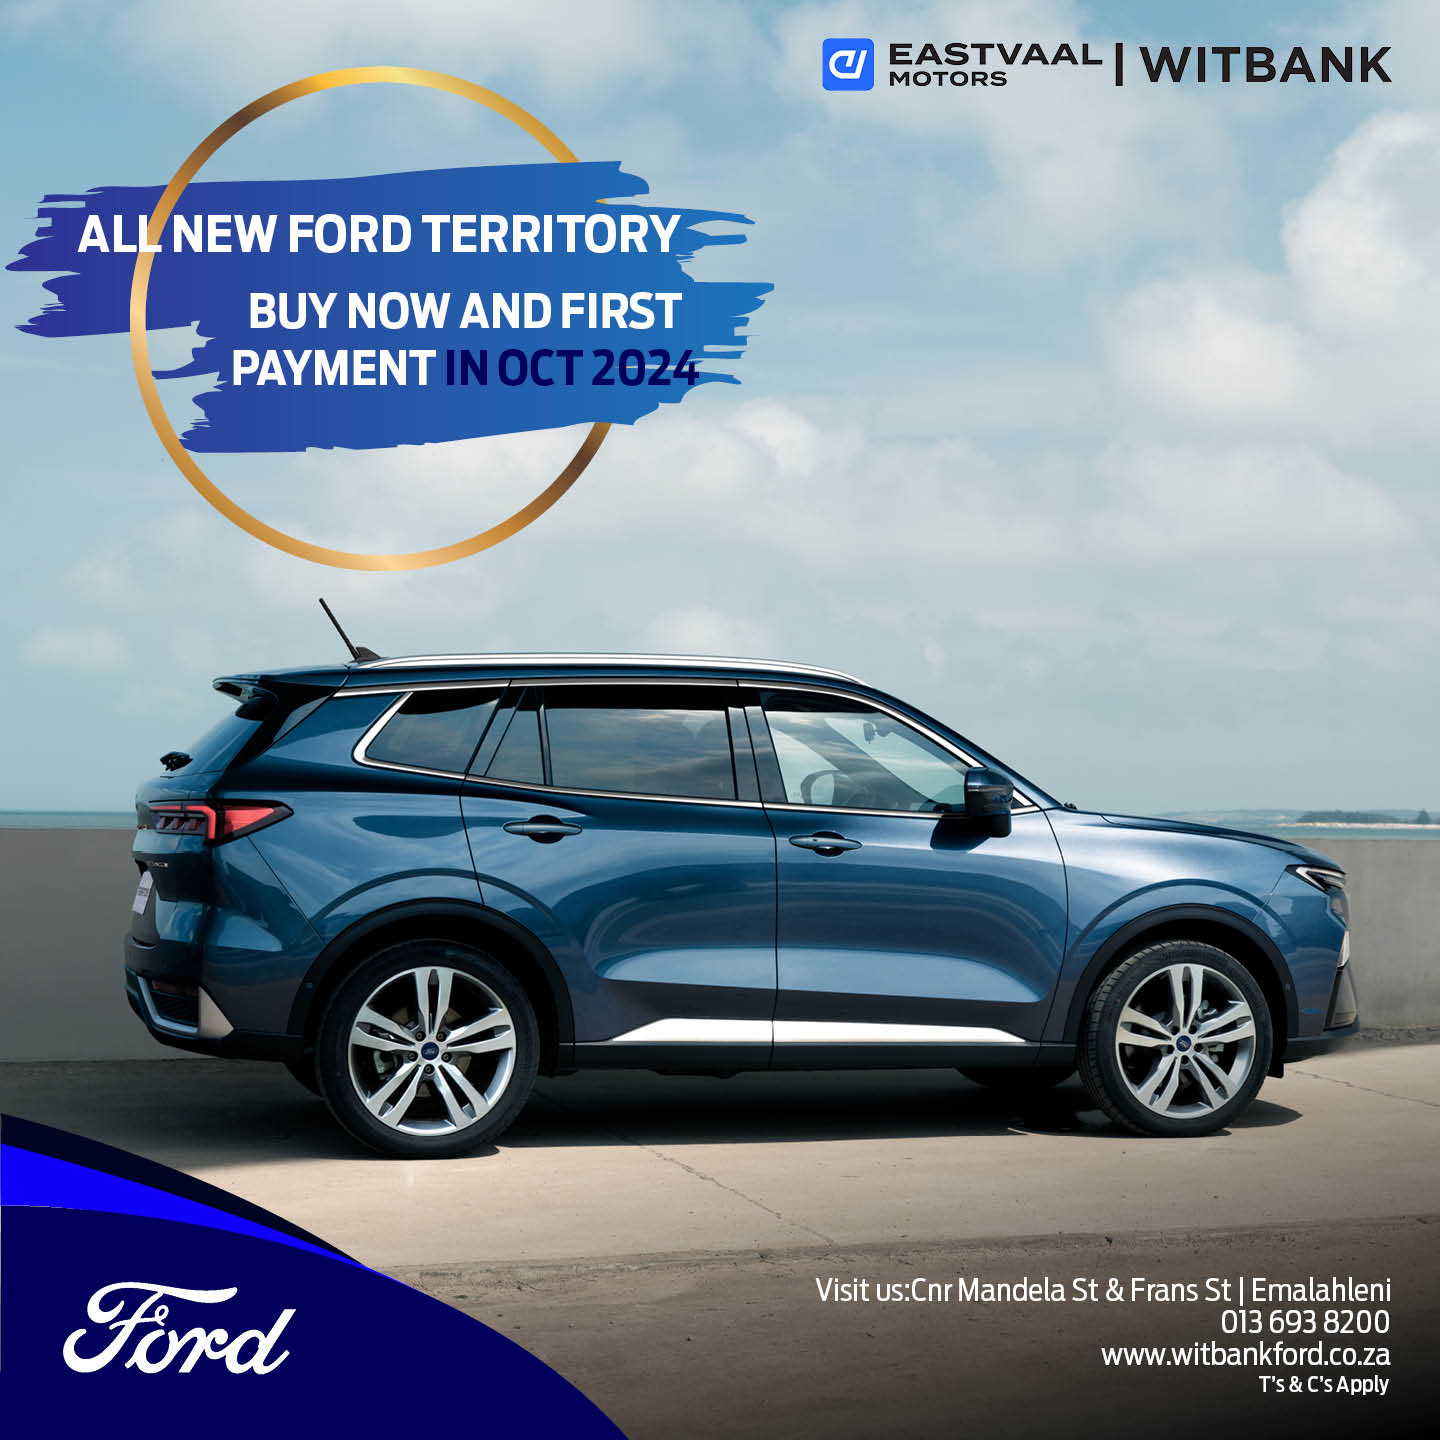 All NEW Ford Territory – Buy NOW, pay LATER! image from 